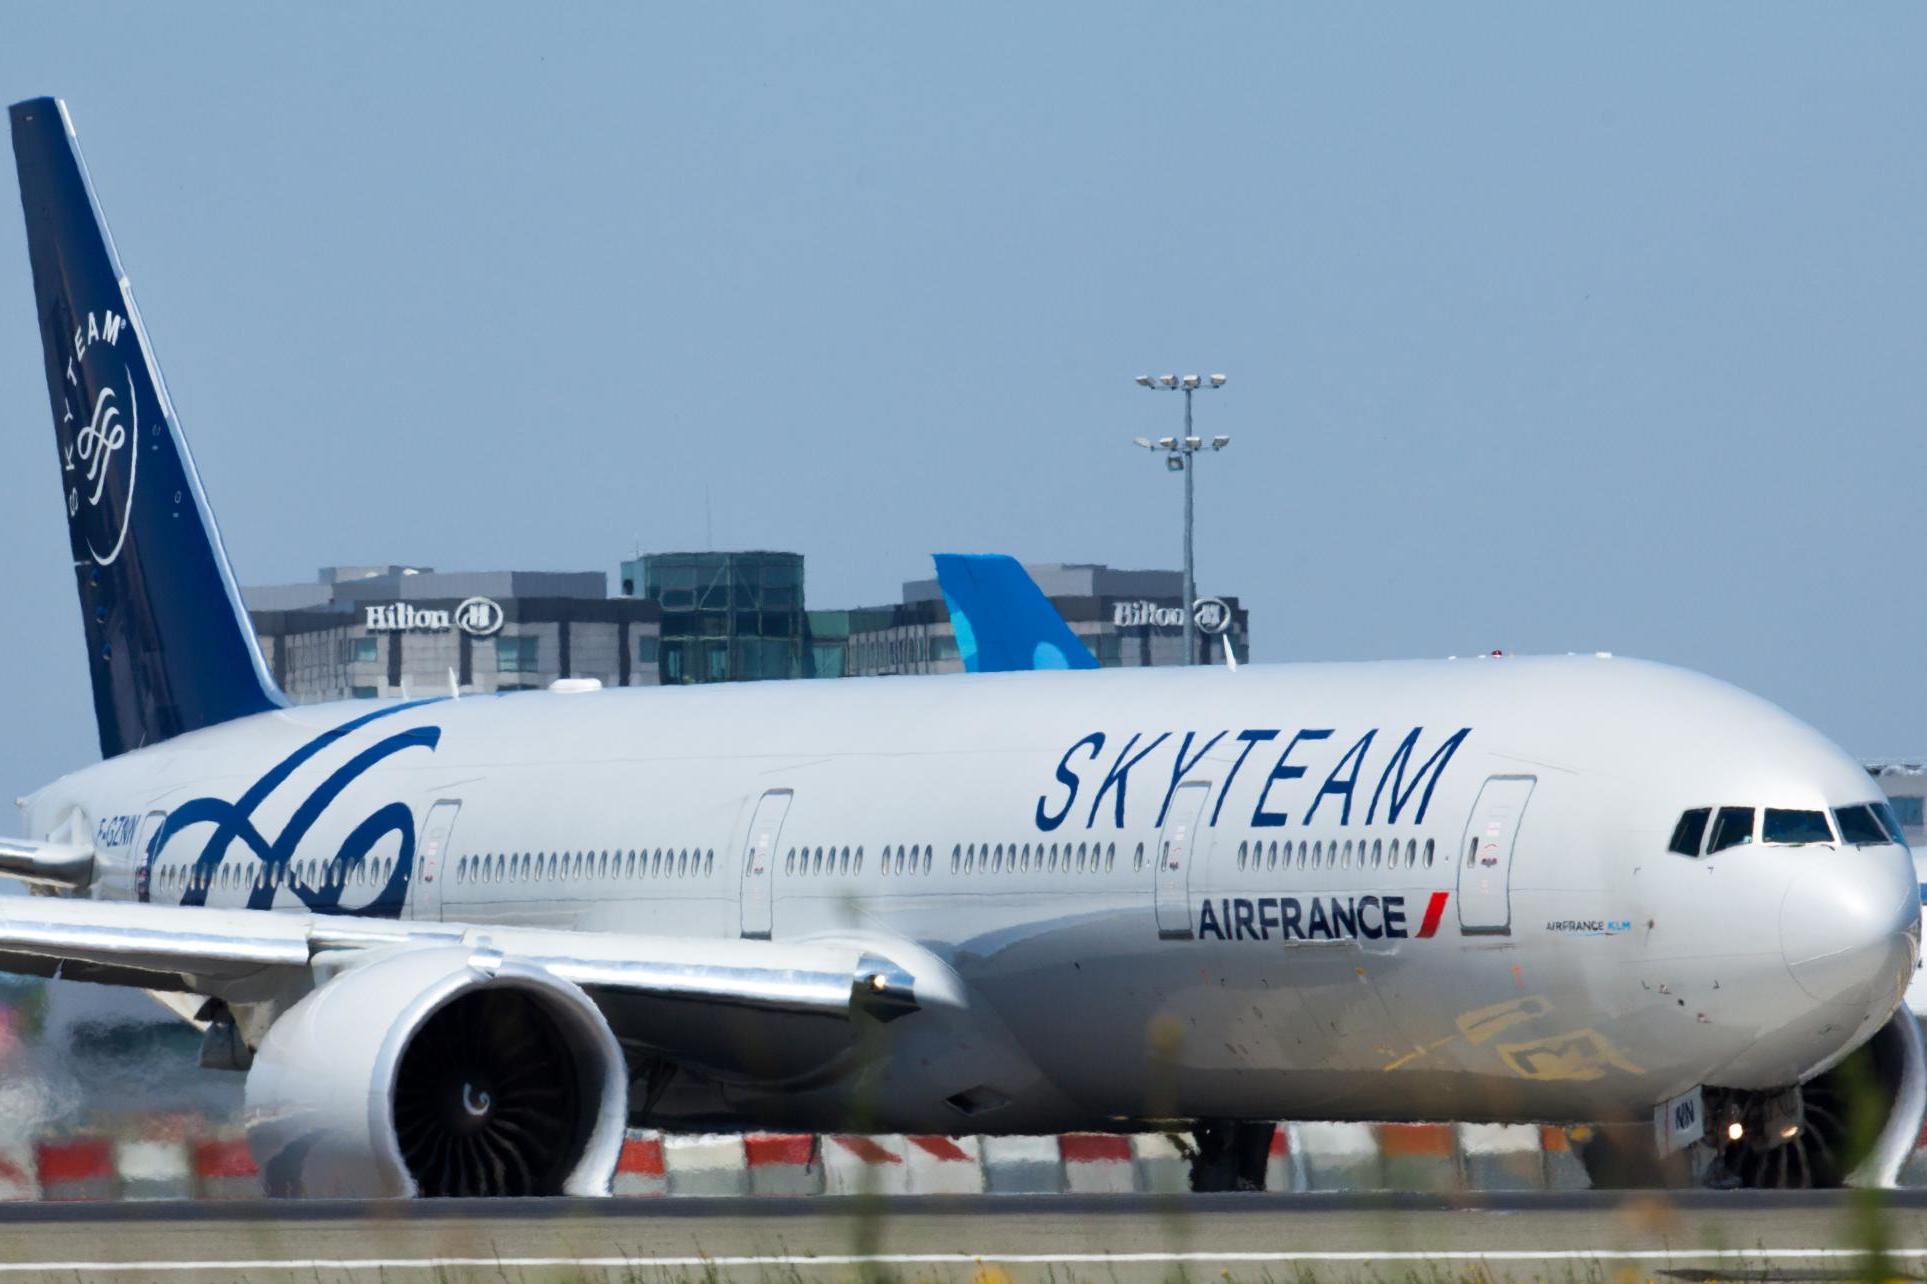 China crisis: Air France ended up flying three successive Boeing 777s to Irkutsk in a bid to get passengers to Shanghai